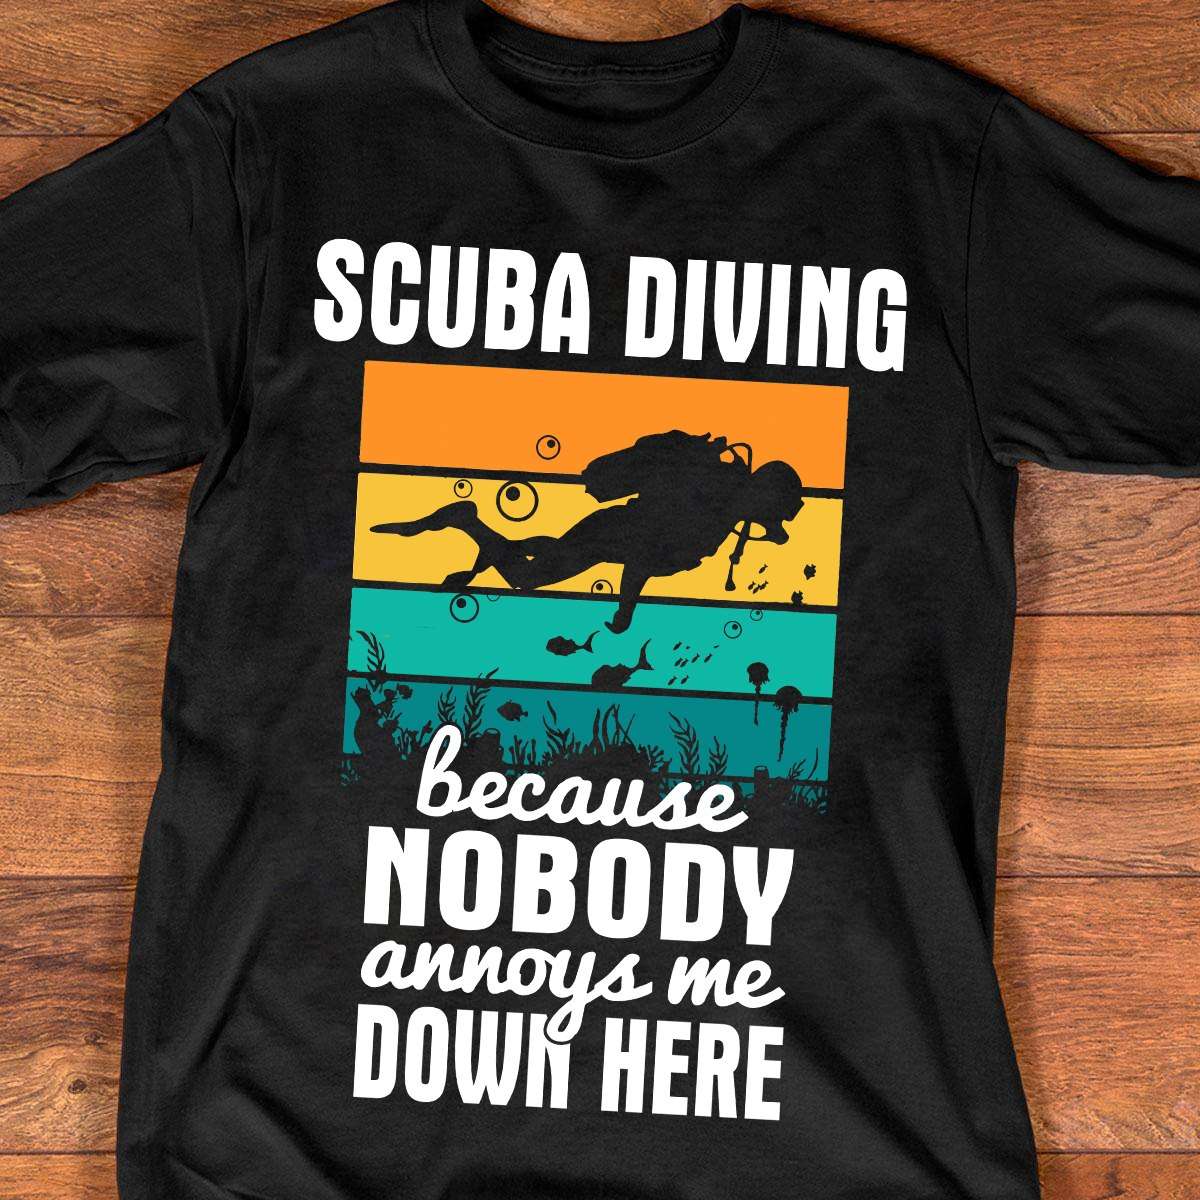 Scuba Diving Man - Scuba Diving because nobody annoys me down here